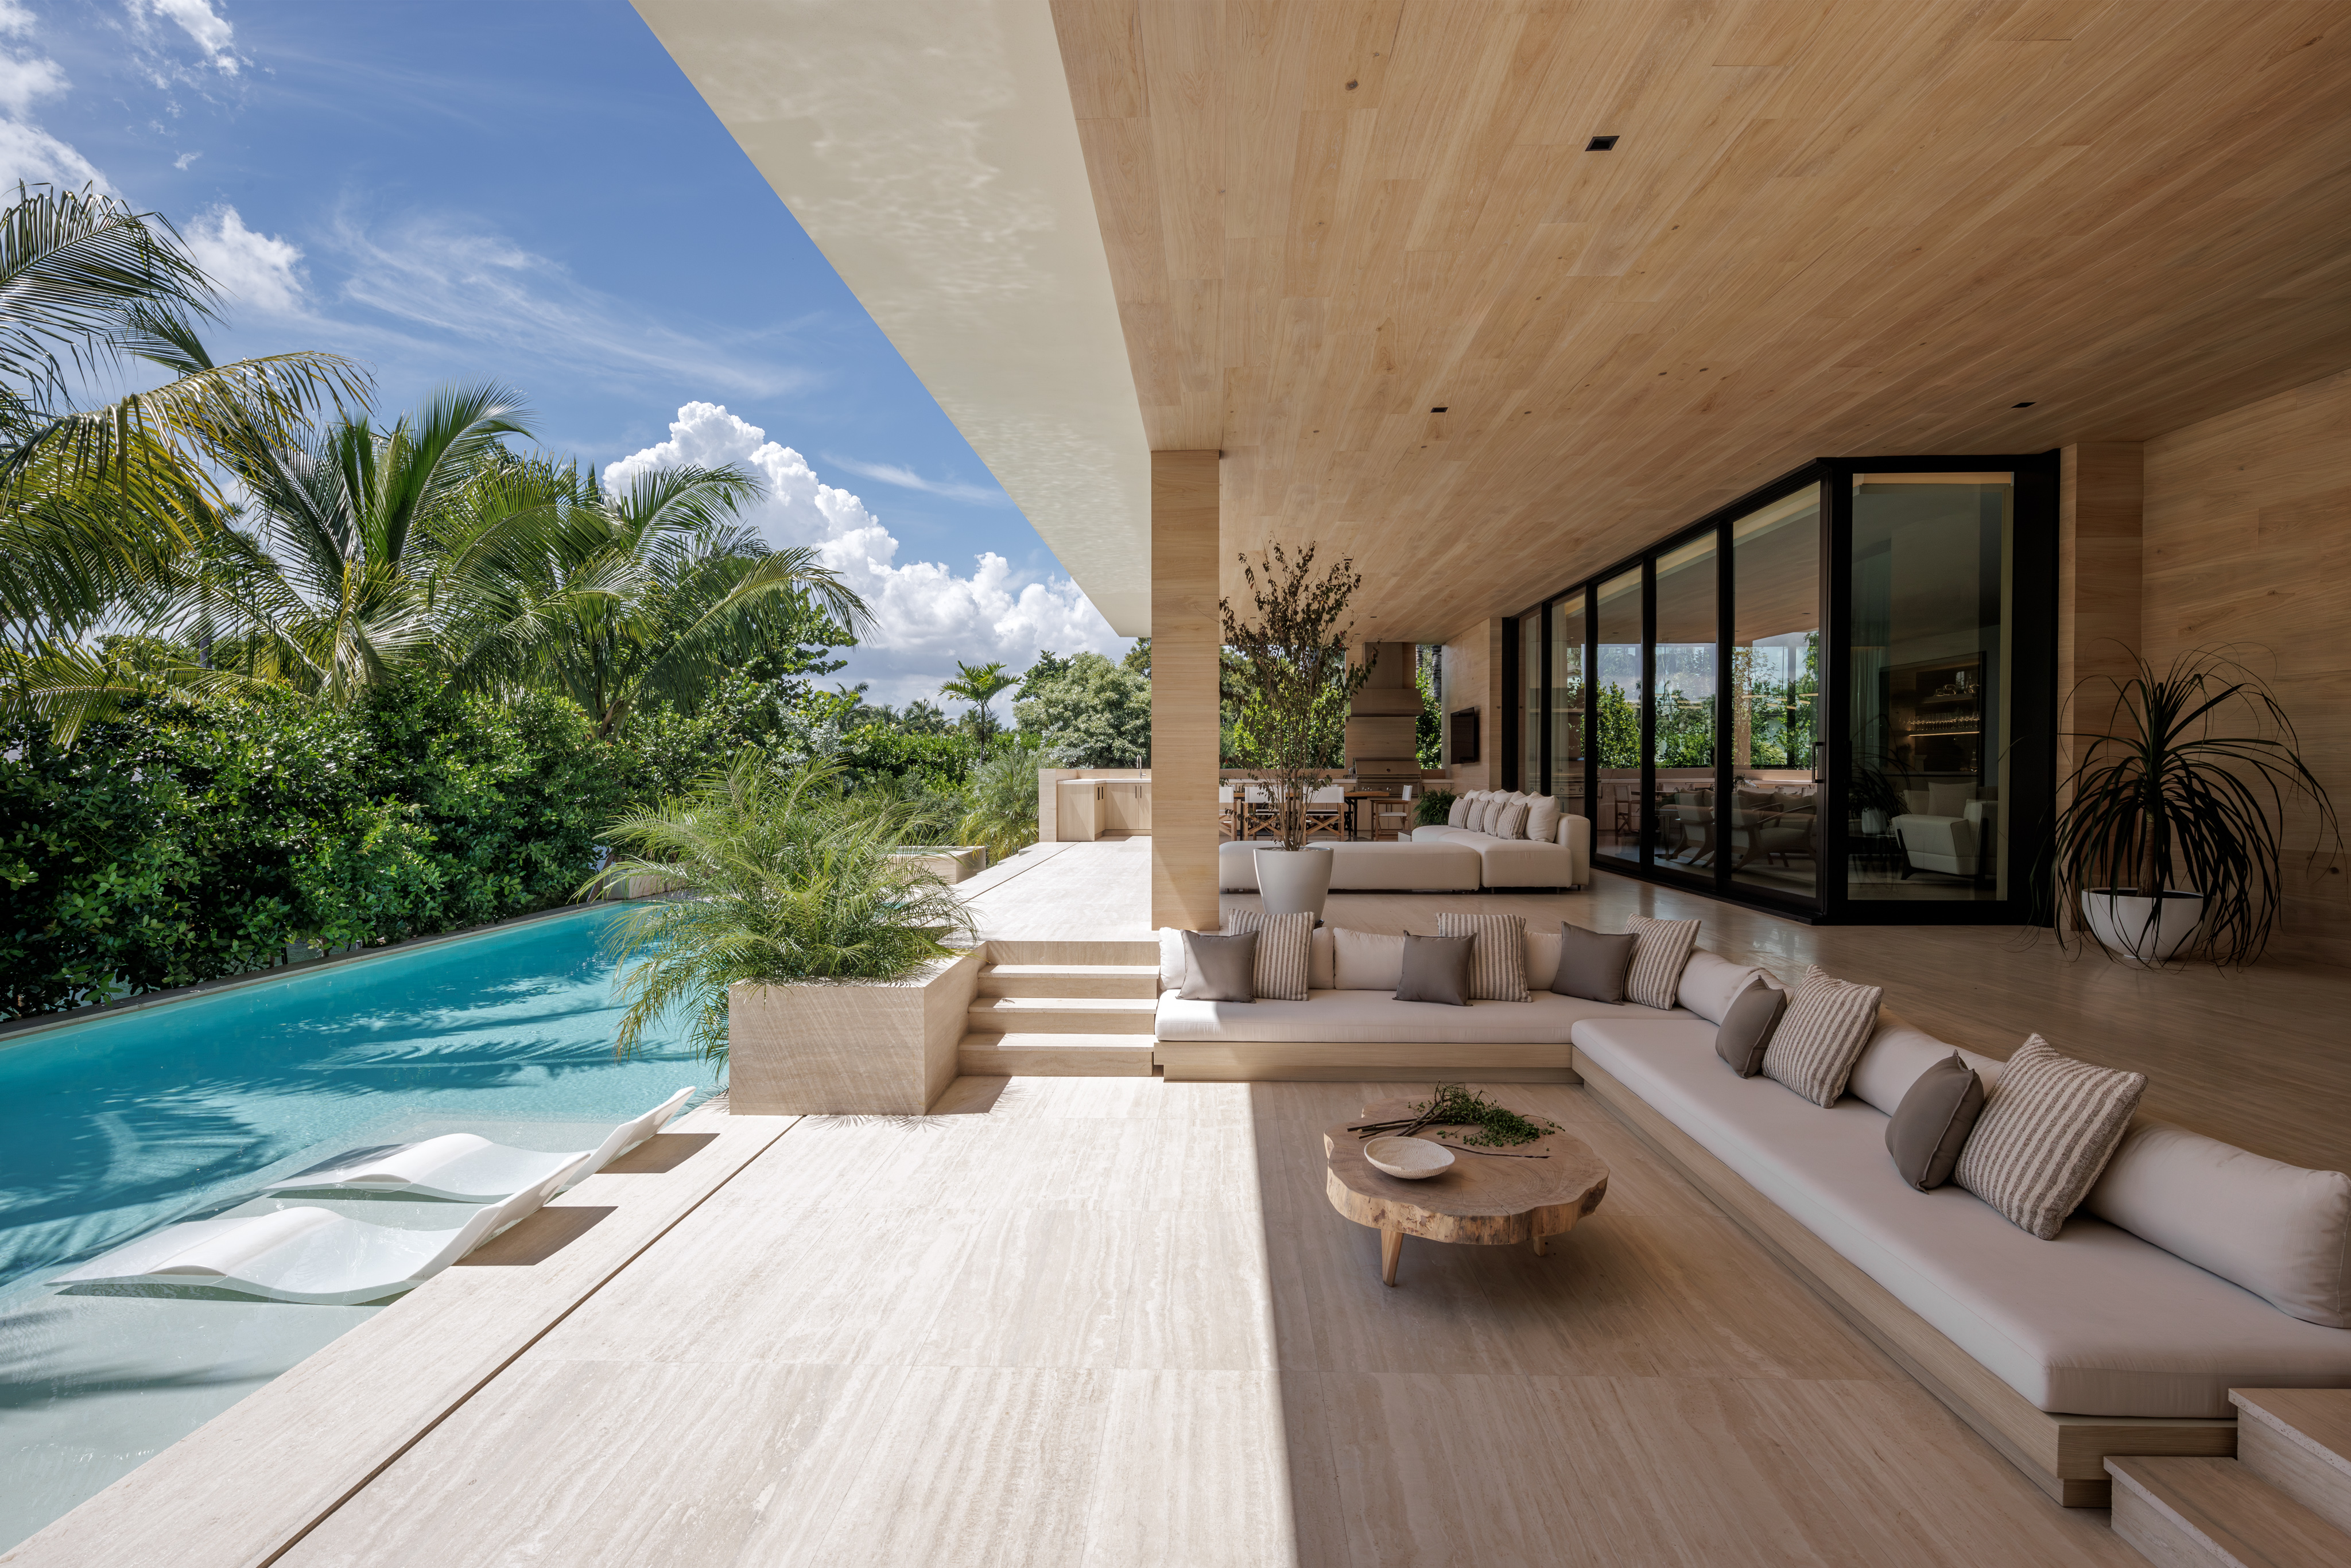 Sunset Island Residence by Strang Design view of indoor outdoor relationship in living space and swimming pool